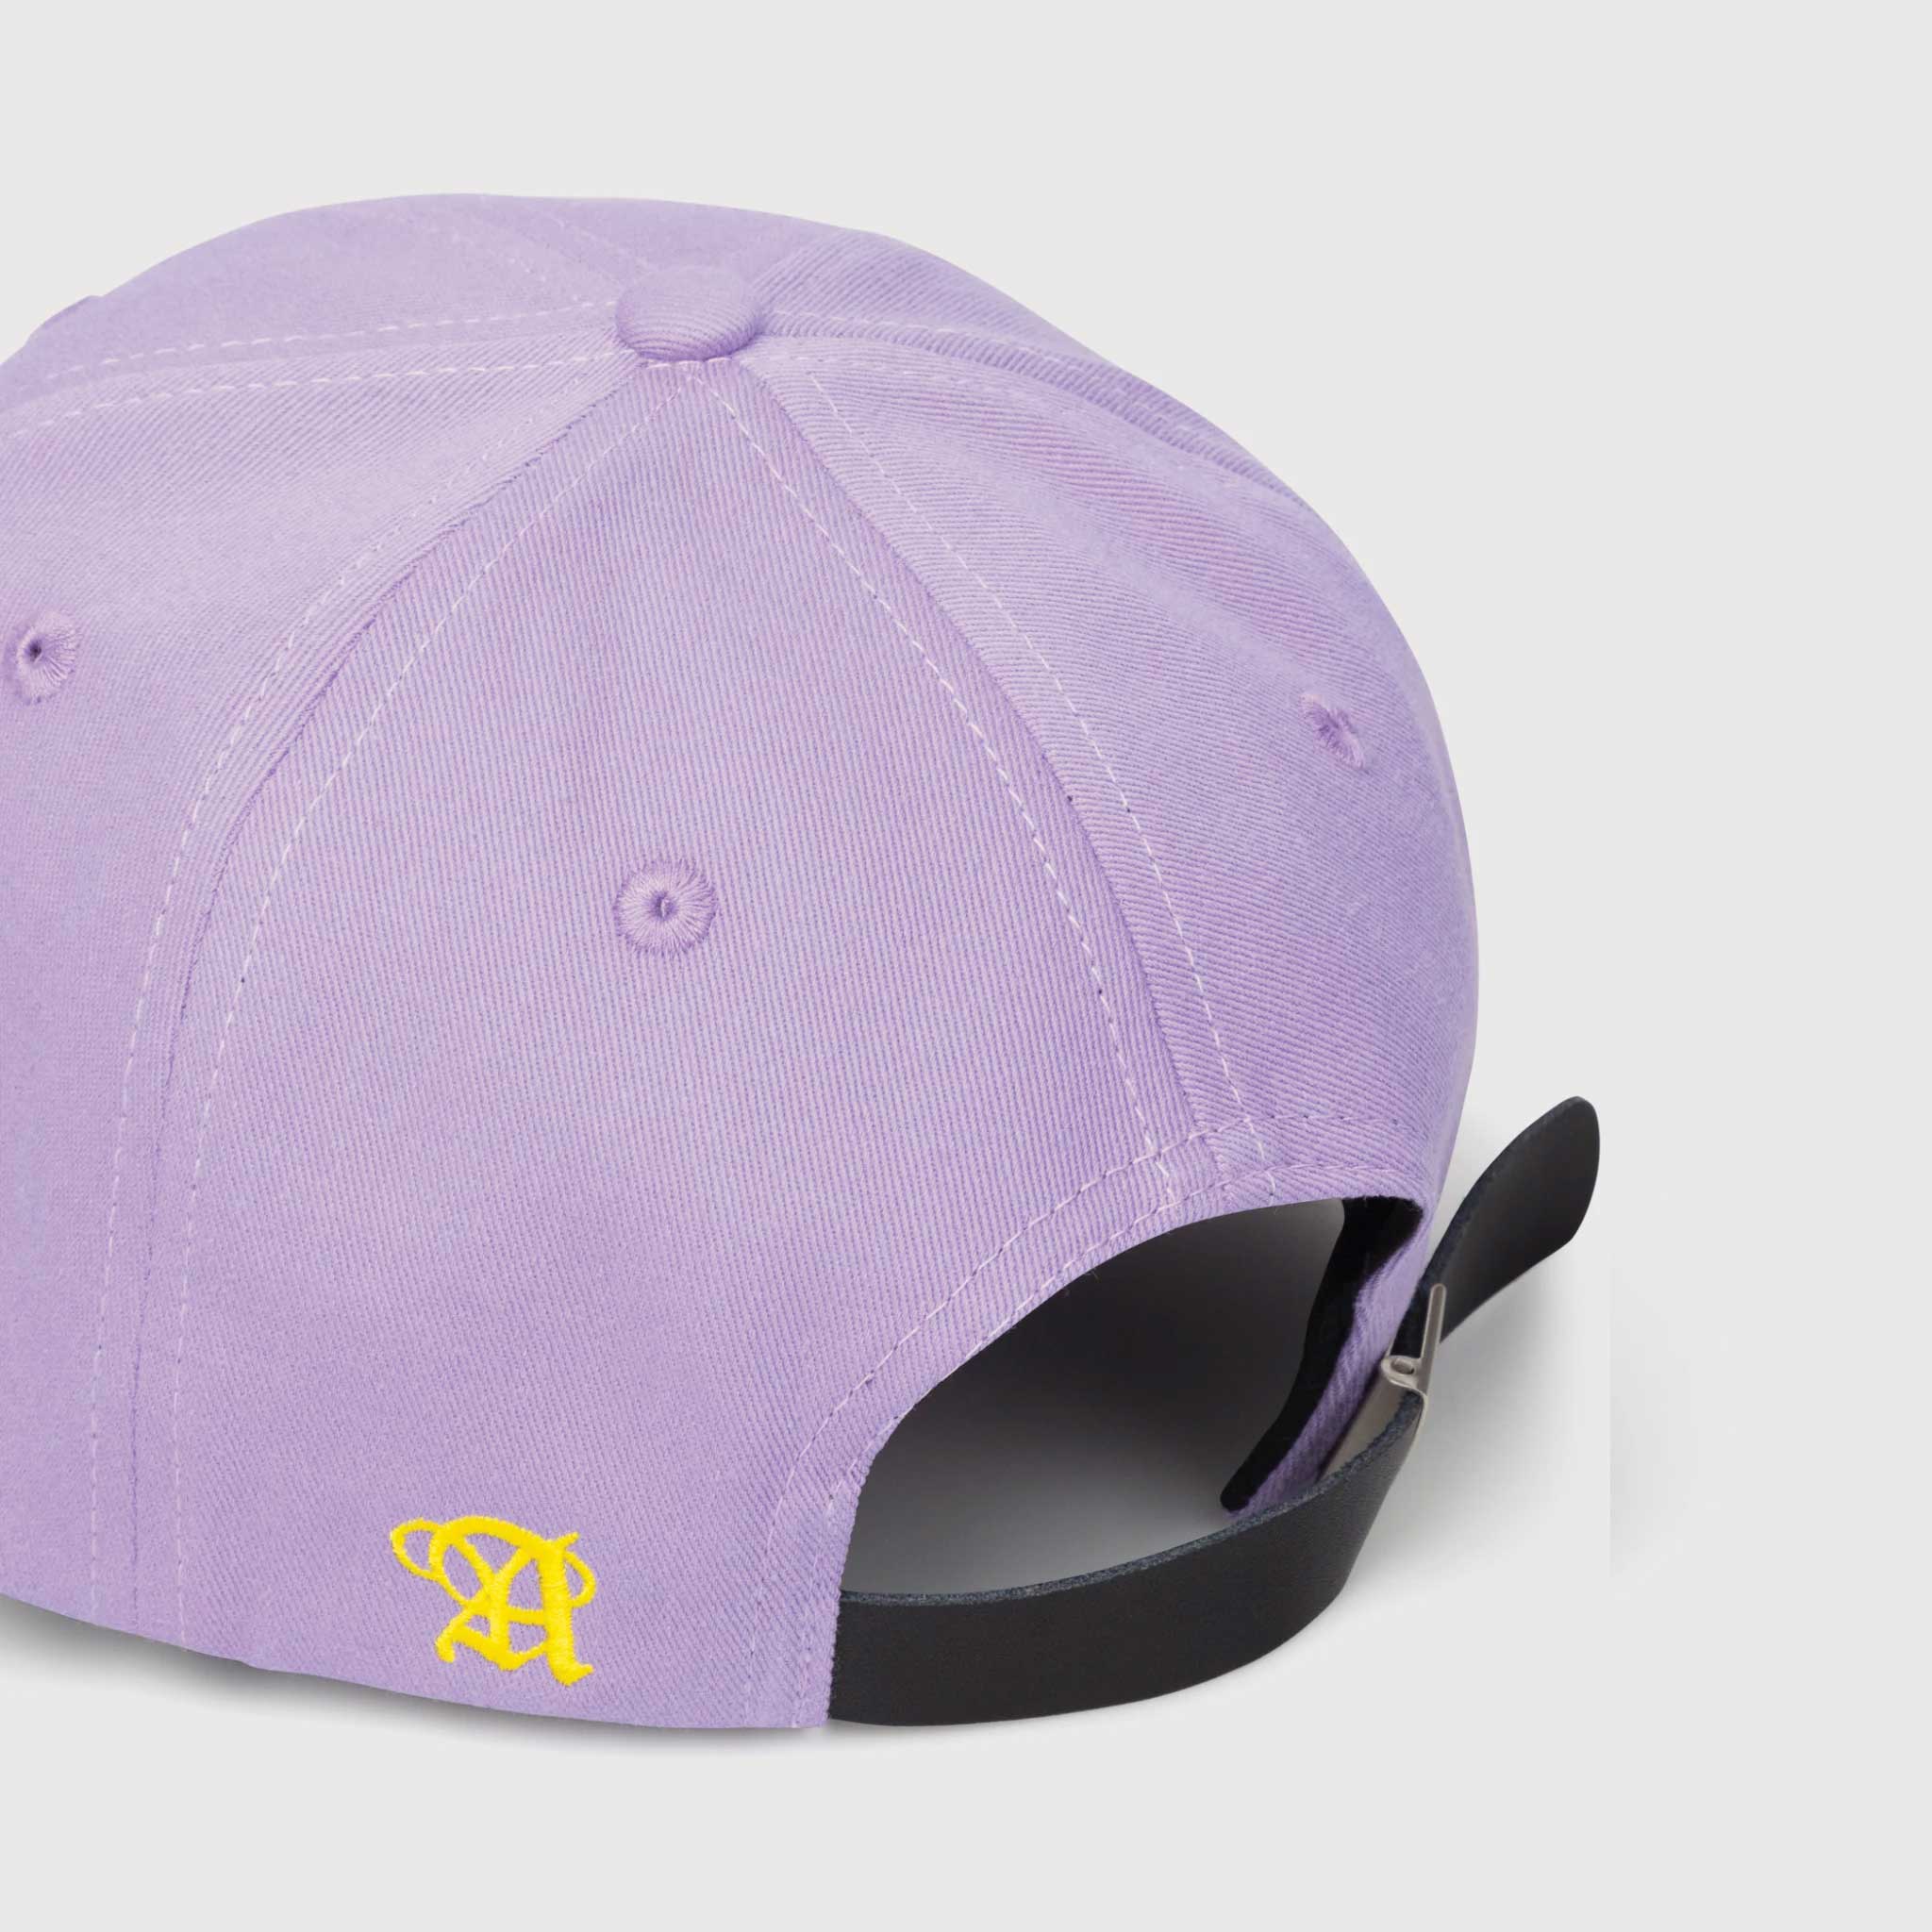 Back detail photo of the No Problemo Cap in lilac purple with yellow embroidery.